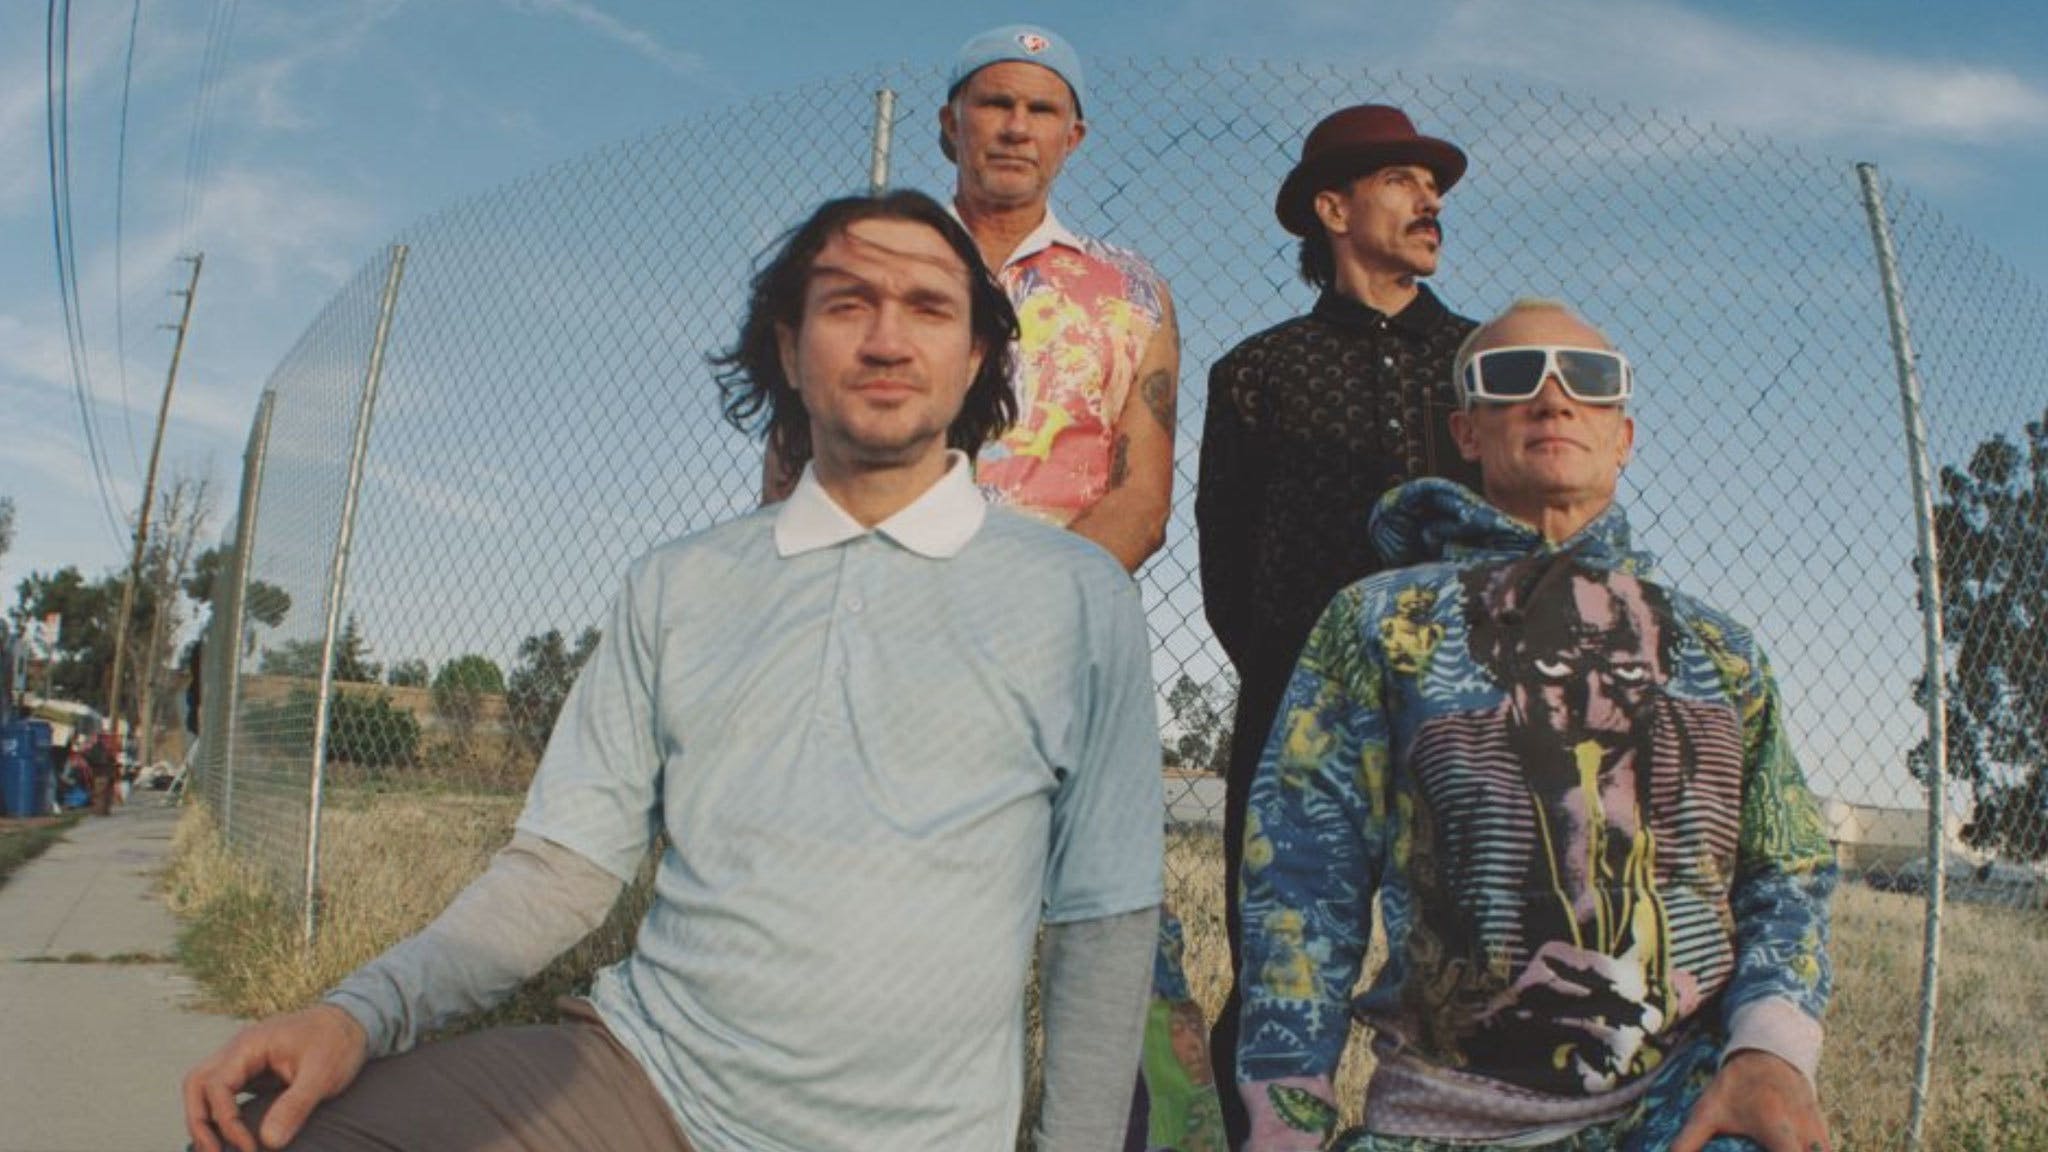 Red Hot Chili Peppers, Smashing Pumpkins and more to headline BottleRock Napa Valley 2023